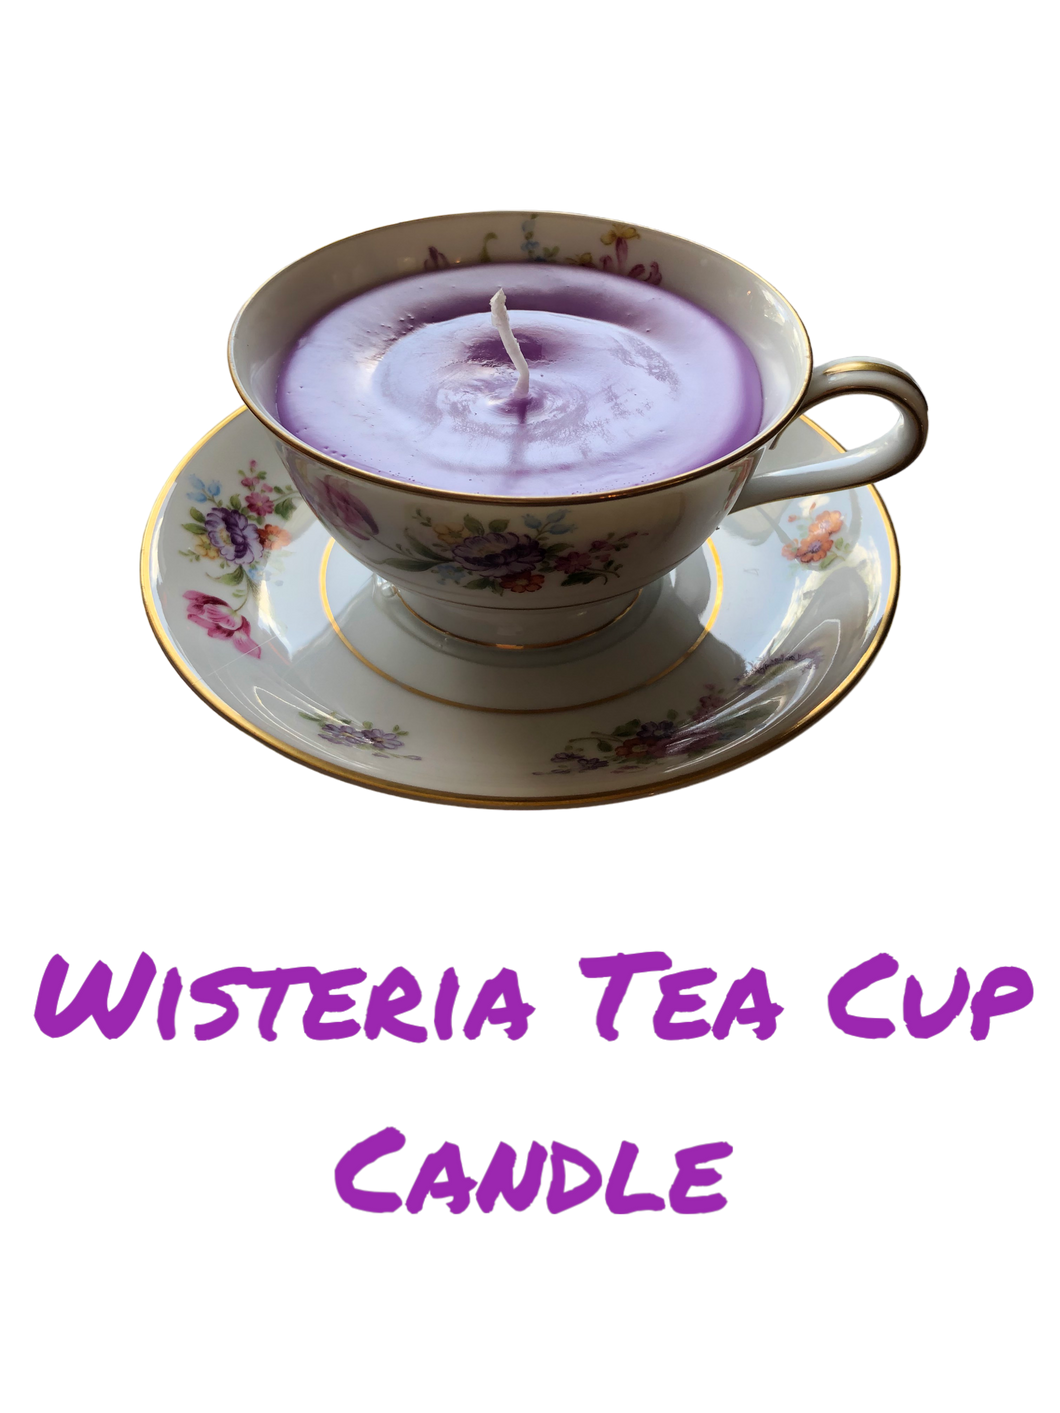 Tea Cup Aromatherapy Candles choose your favorite scent